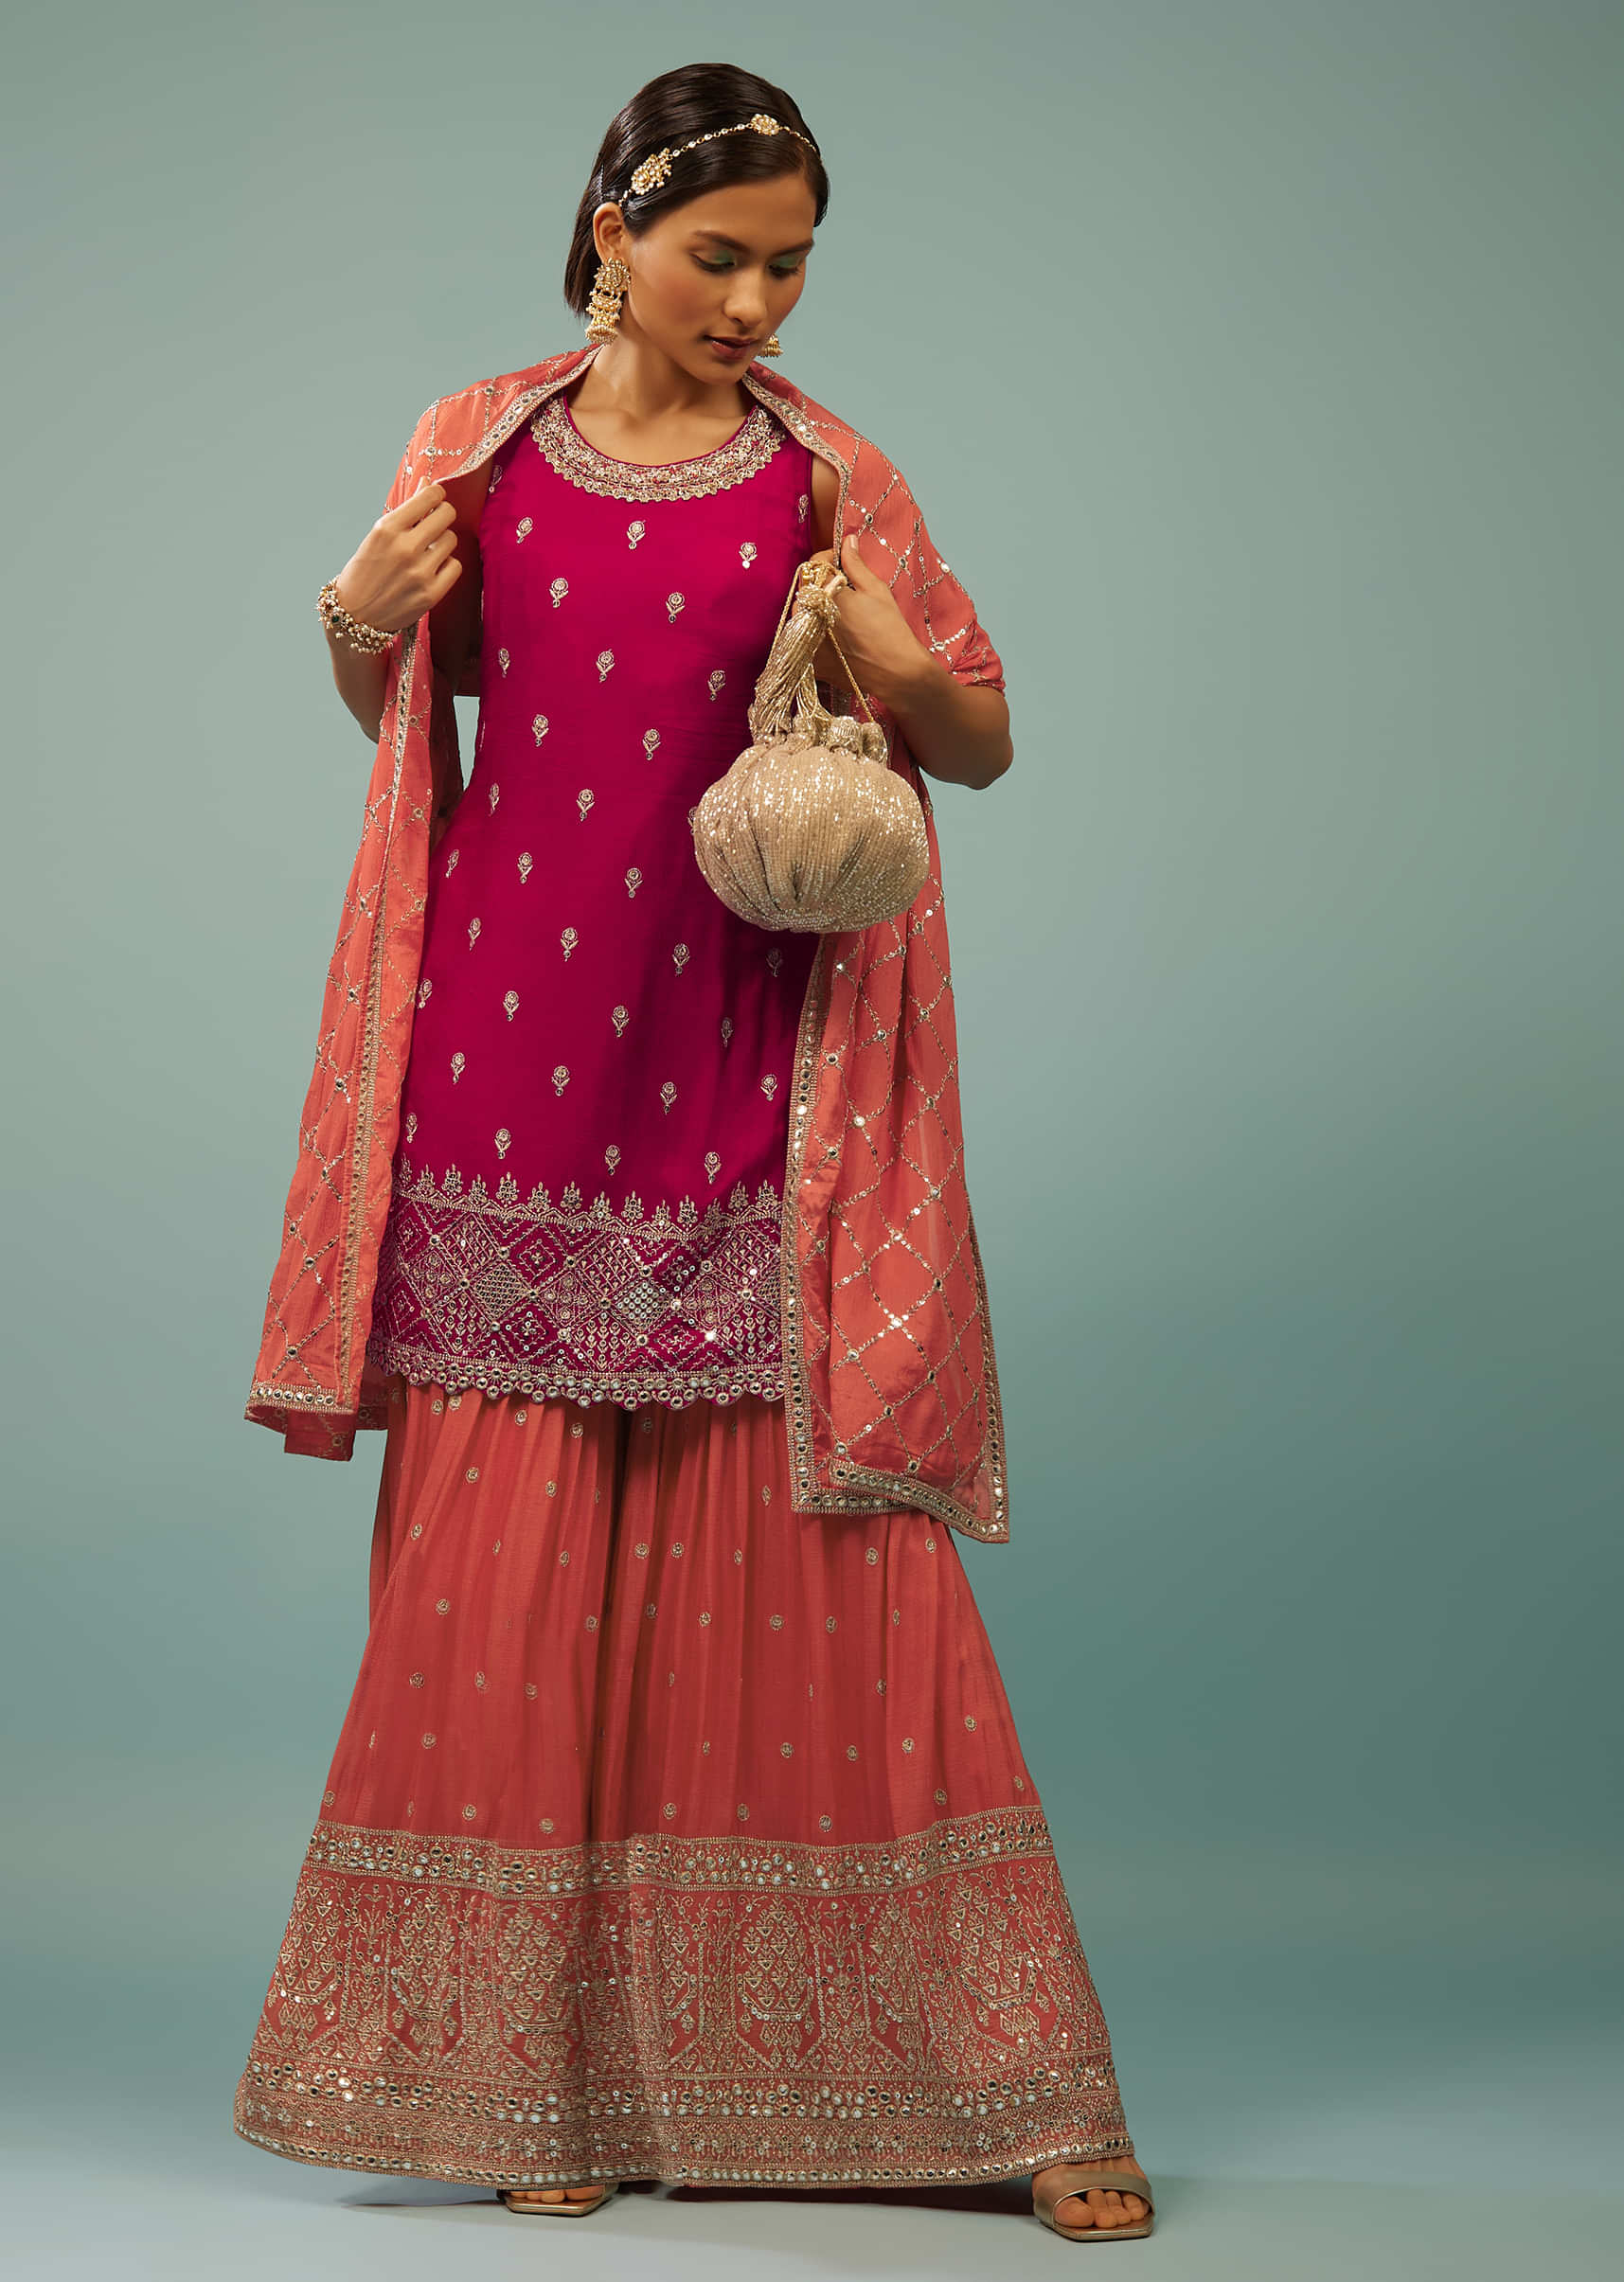 Kalki Rasberry Wine Pink Sharara Suit With Embroidery